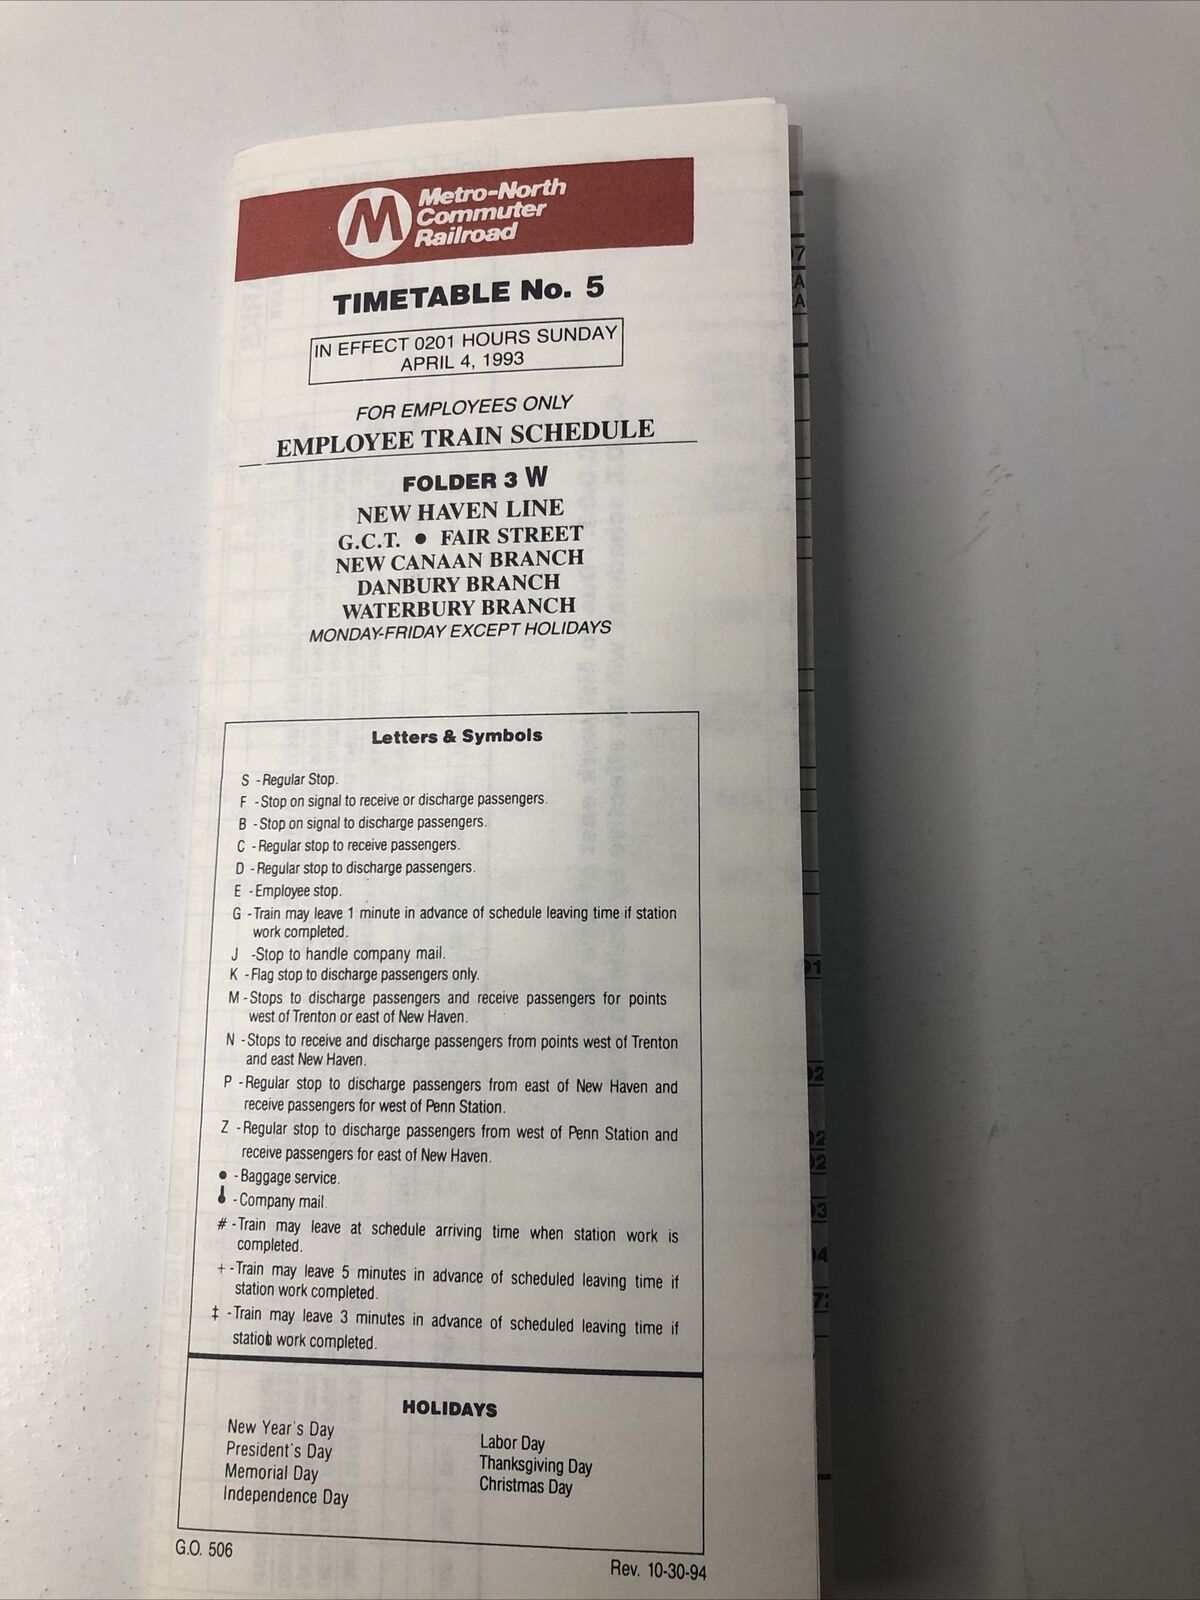 APRIL 4, 1993 METRO NORTH COMMUTER EMPLOYEE TIMETABLE #5   #4